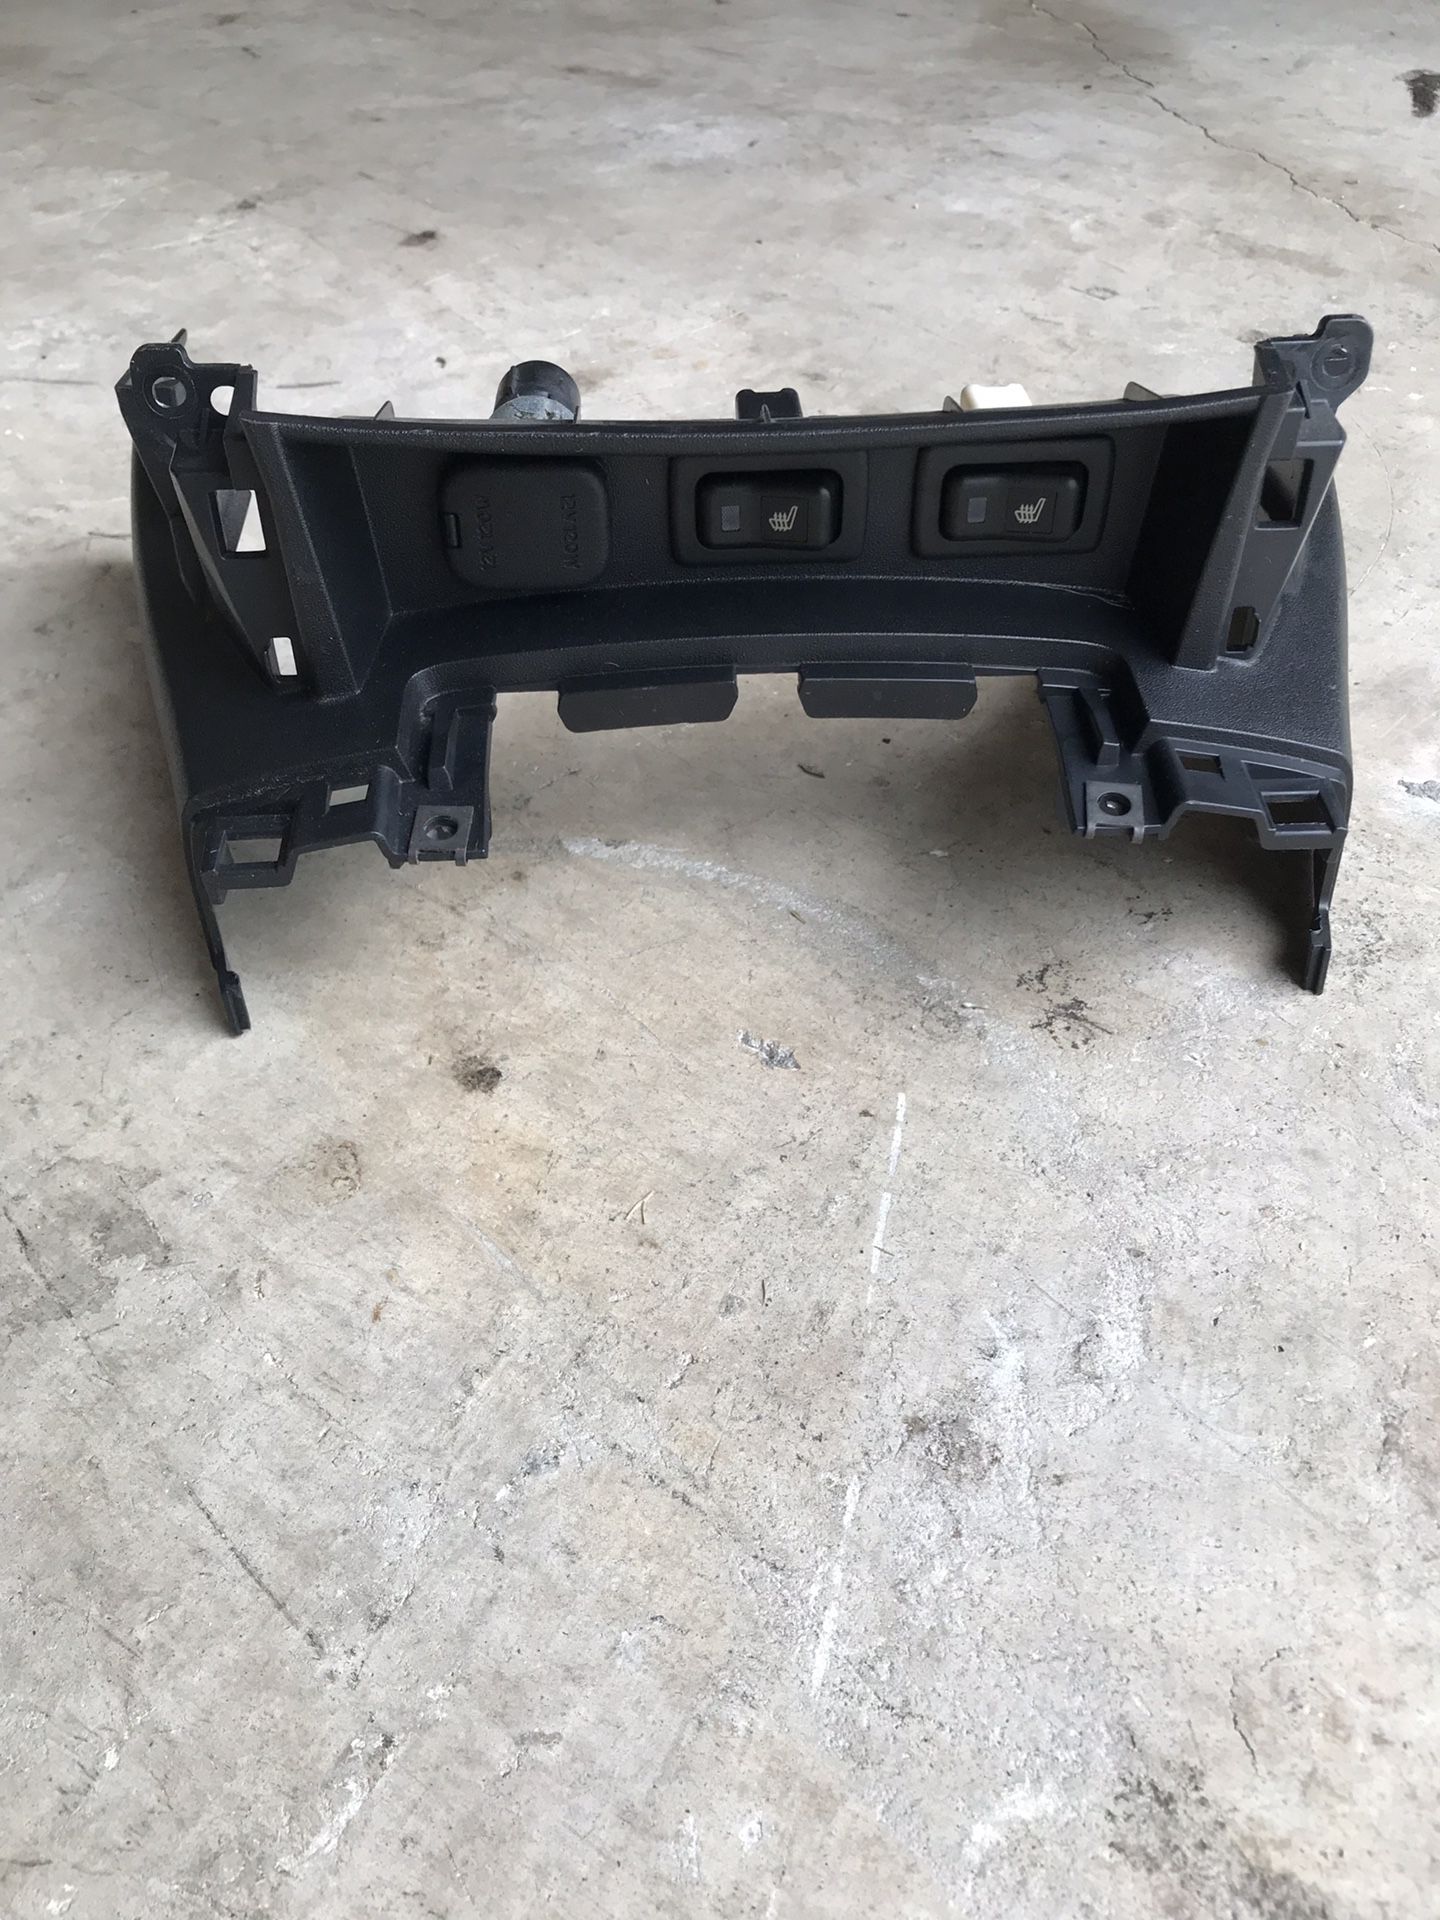 Used 2006-2015 Mazda Mx5 Miata NC Factory parts (only shows in the pictures)